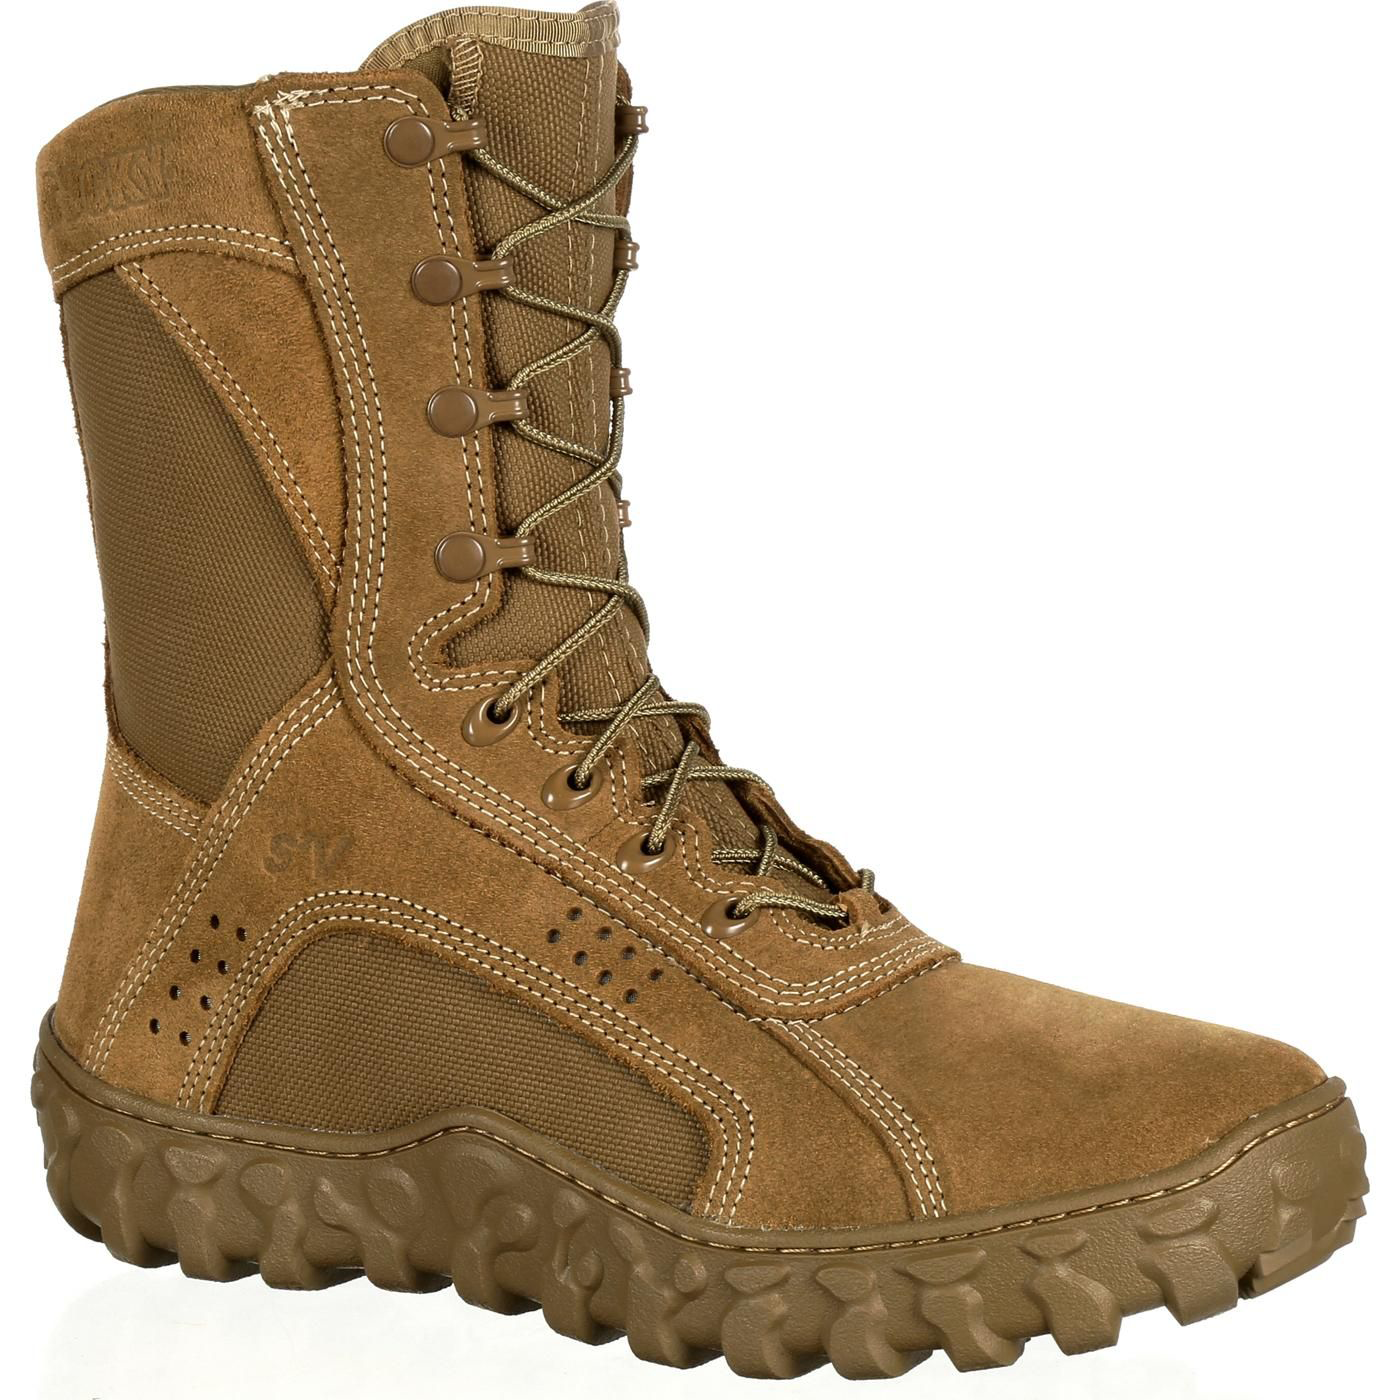 Rocky S2V Tactical Military Boots for Men - Coyote Brown - 17W